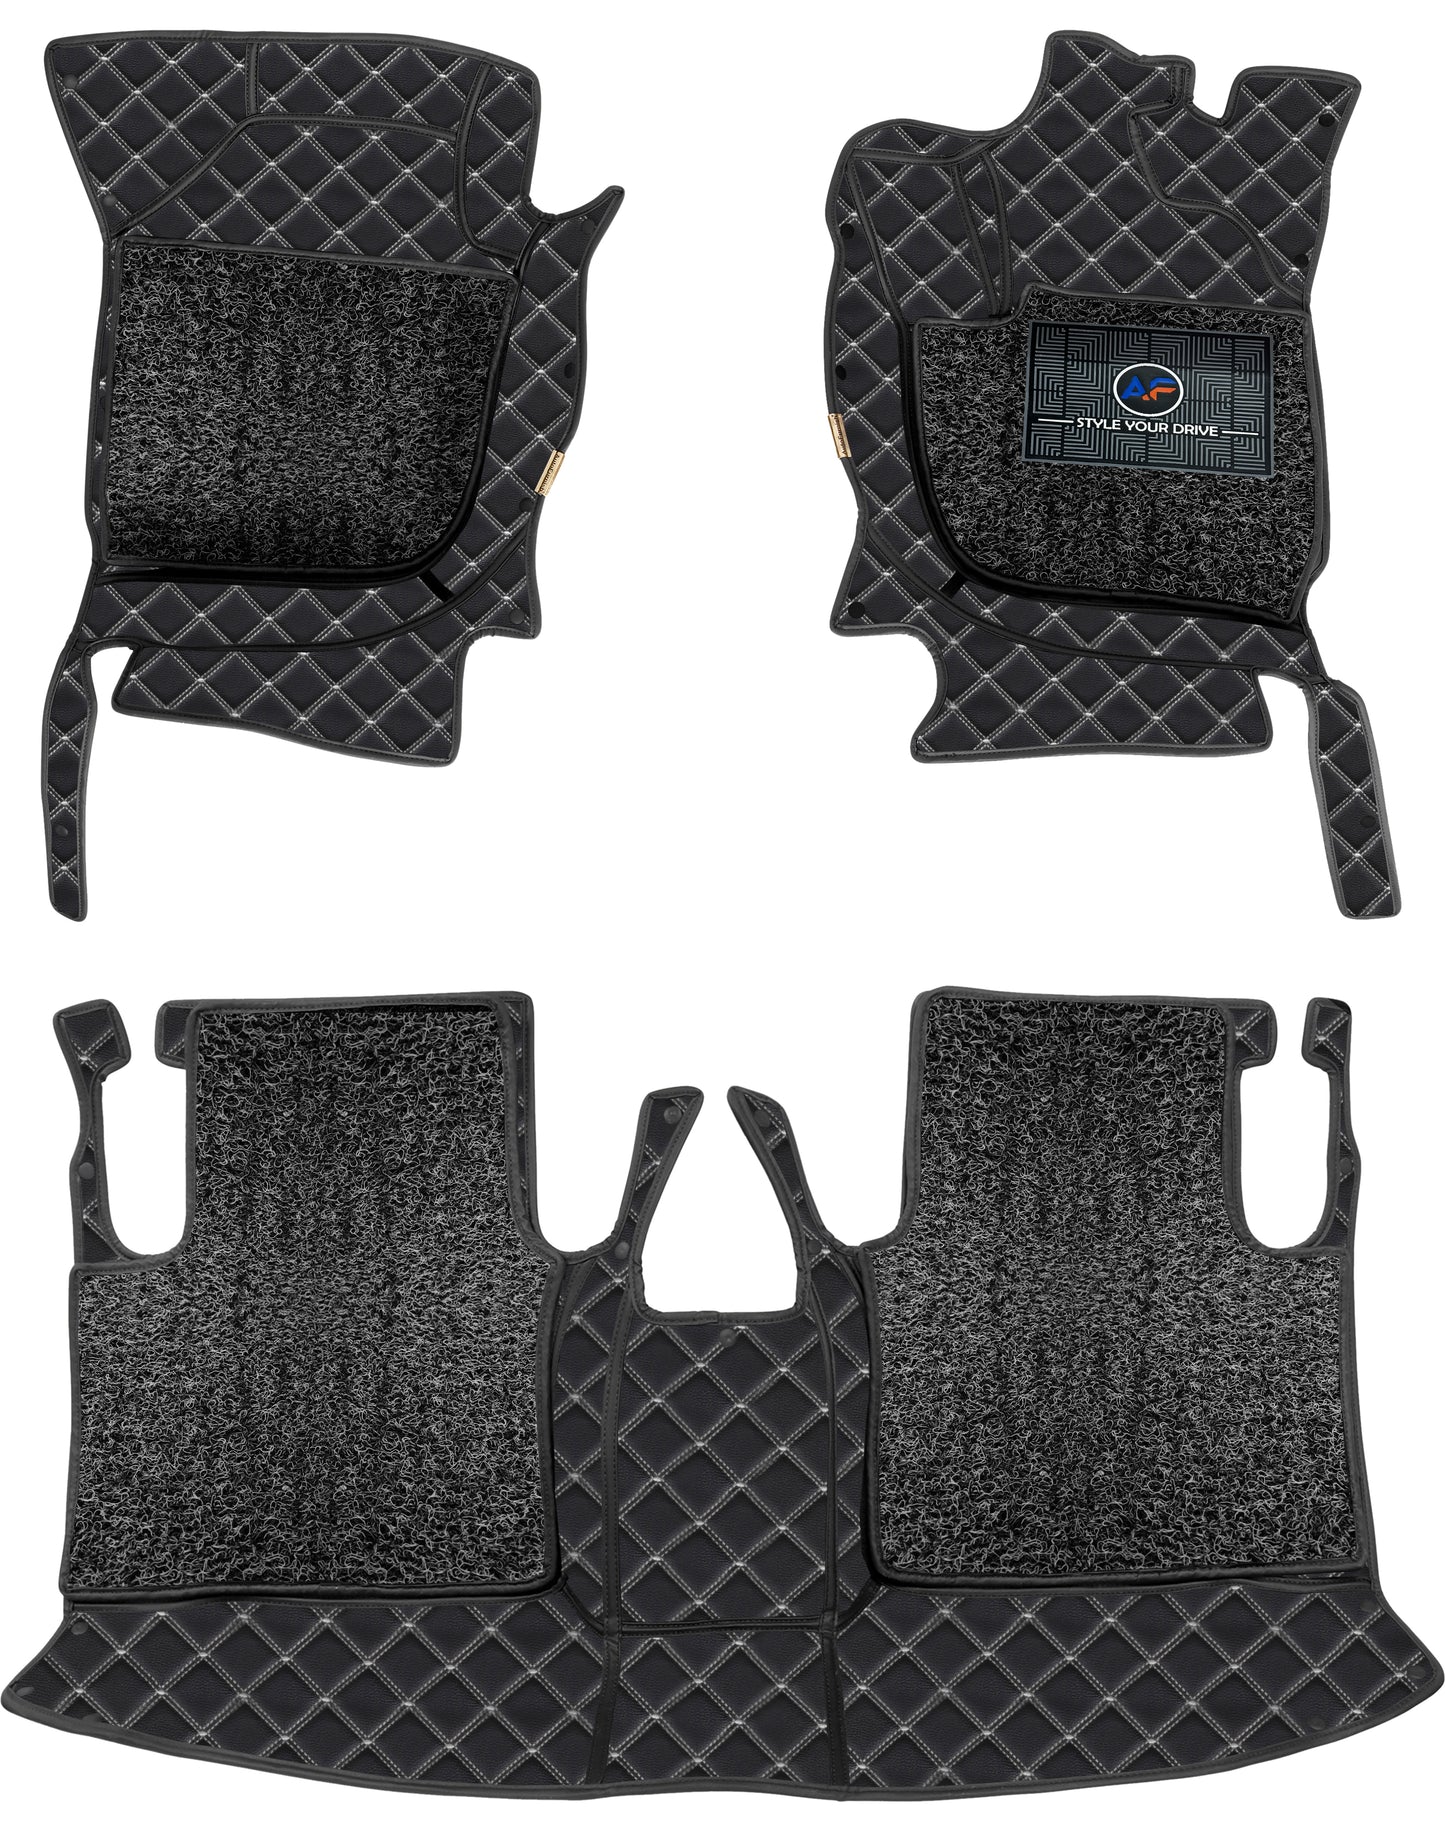 Audi Q5 2018-21-7D Luxury Car Mat, All Weather Proof, Anti-Skid, 100% Waterproof & Odorless with Unique Diamond Fish Design (24mm Luxury PU Leather, 2 Rows)